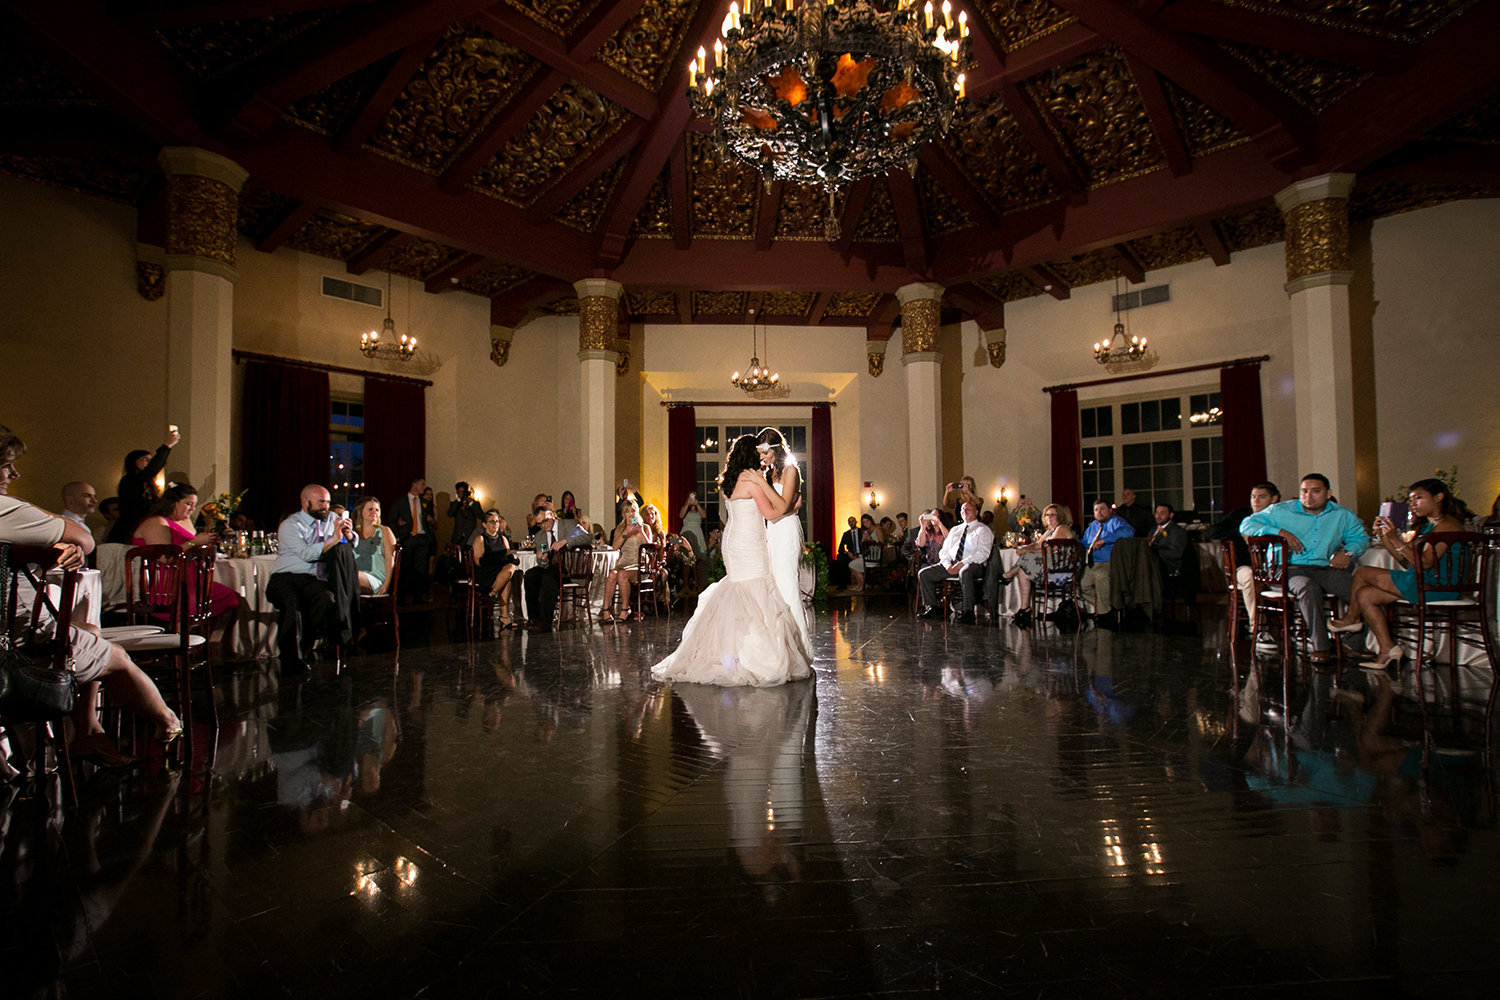 First Dance in an ornate and moody reception room | The El Cortez in San Diego